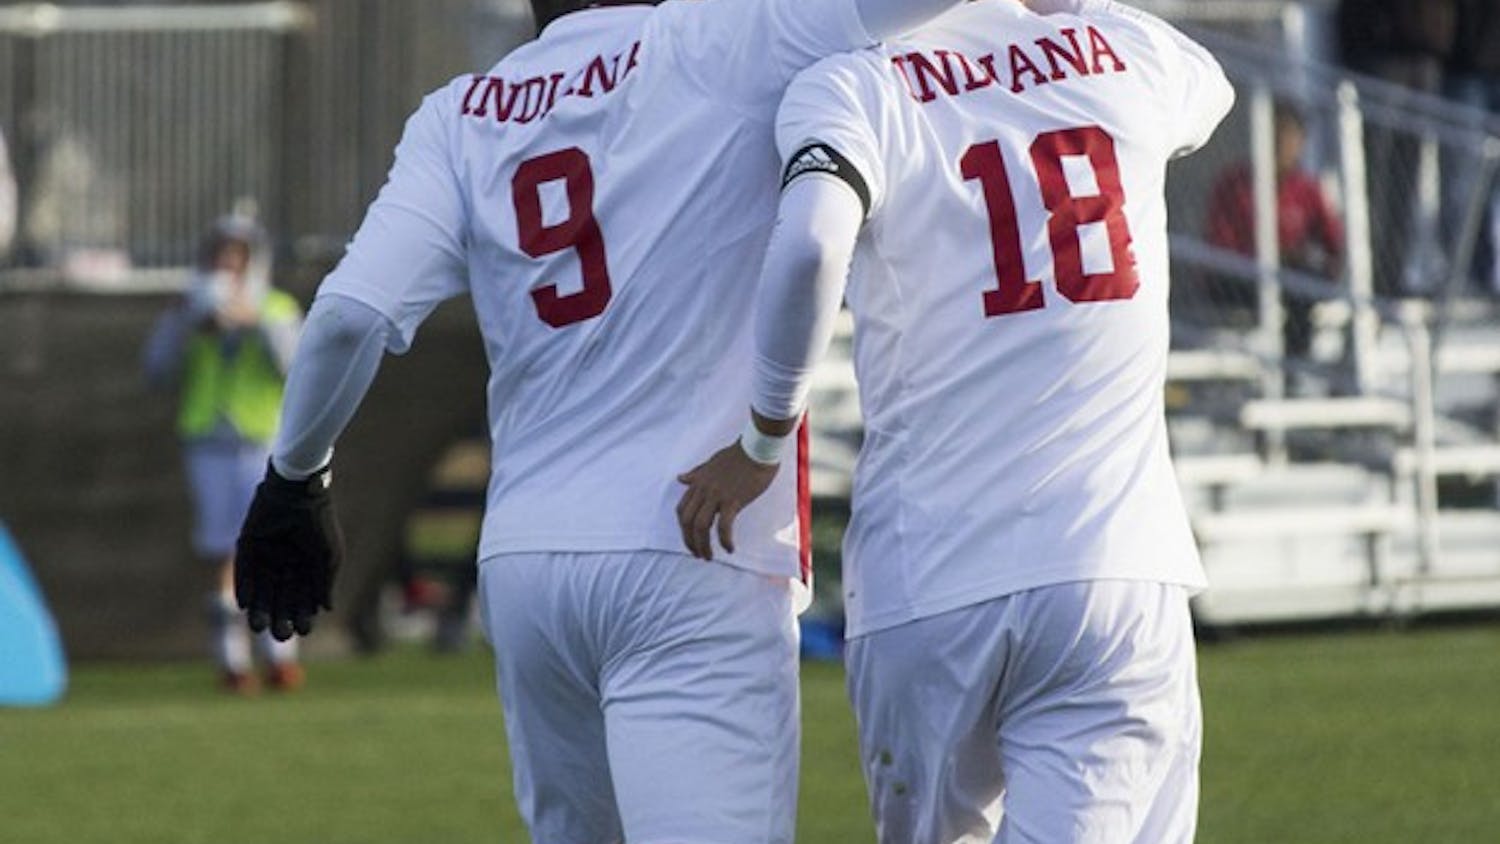 Indiana's Rashard Hyacenth (left) and Richard Ballard (right) during Friday afternoon's 3-4 loss in PKs against Wisconsin at Grand Park.